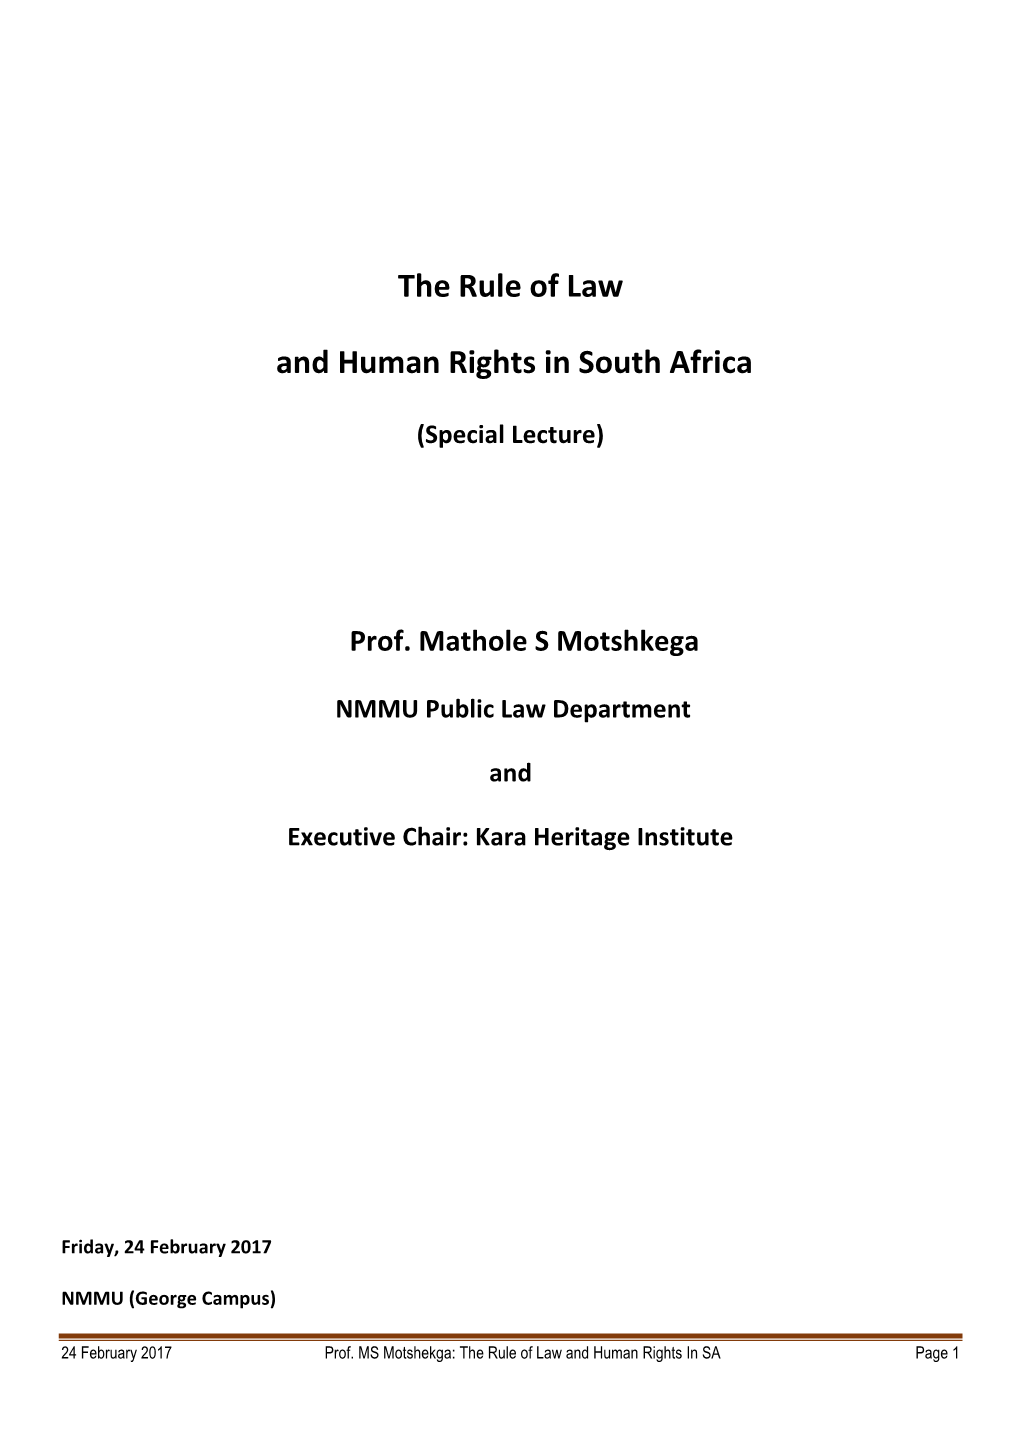 The Rule of Law and Human Rights in South Africa